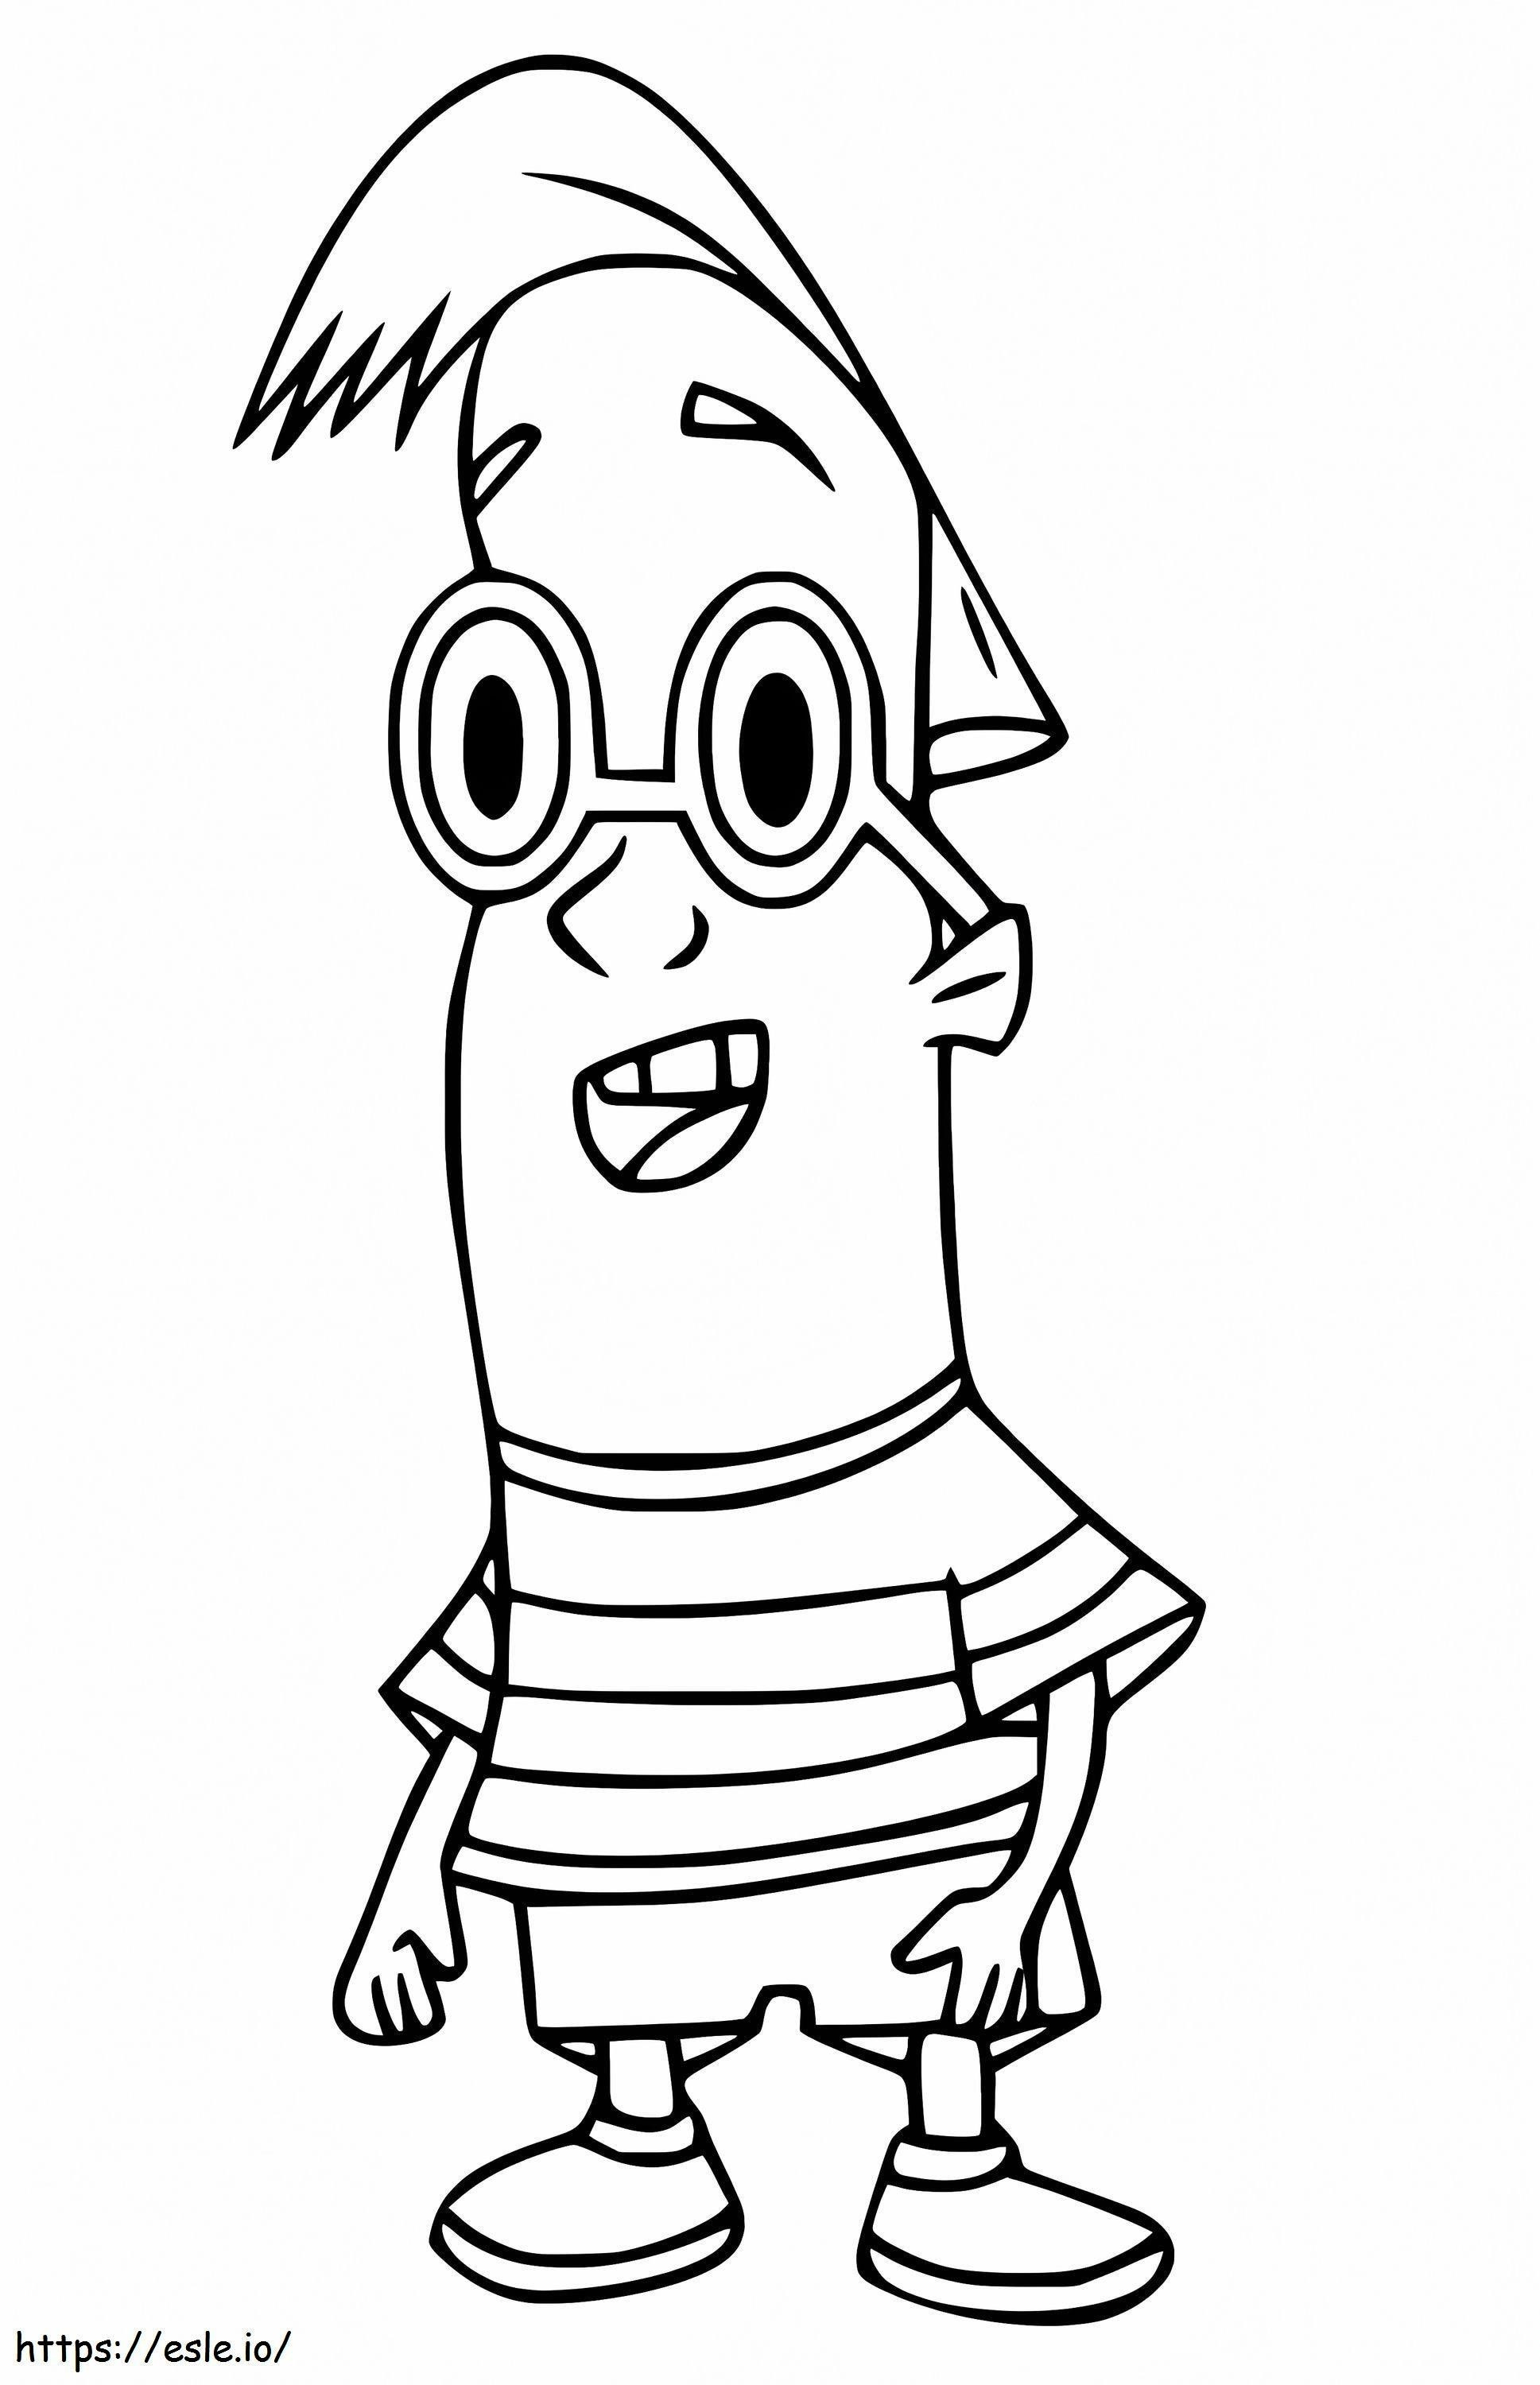 Andy From Squirrel Boy coloring page